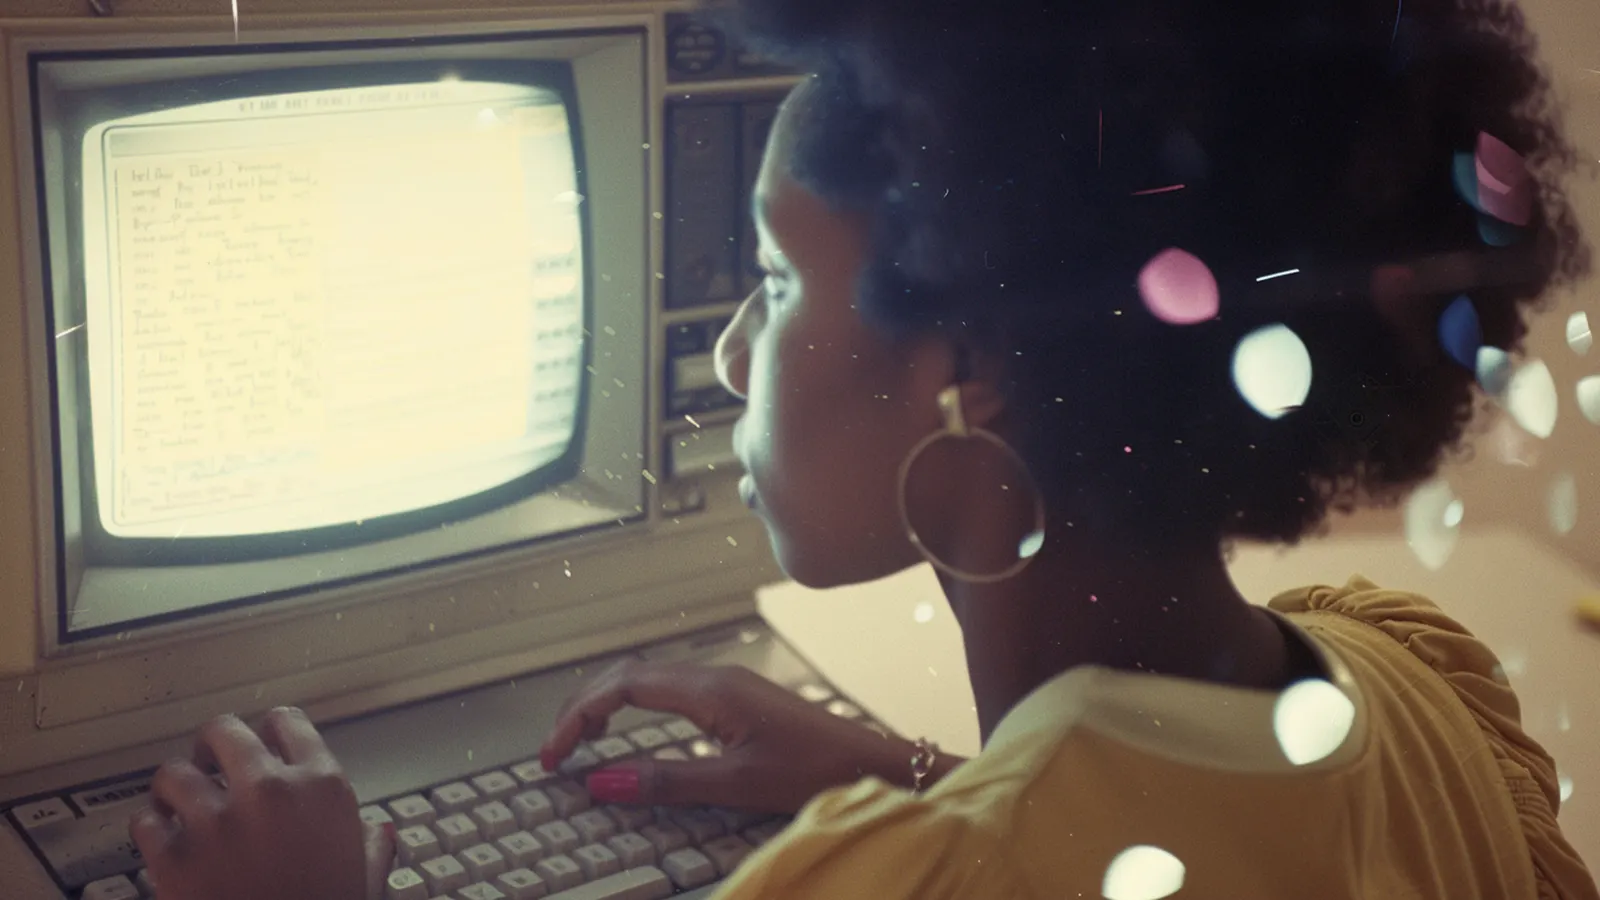 looking over the shoulder of a black woman reading a retro computer screen